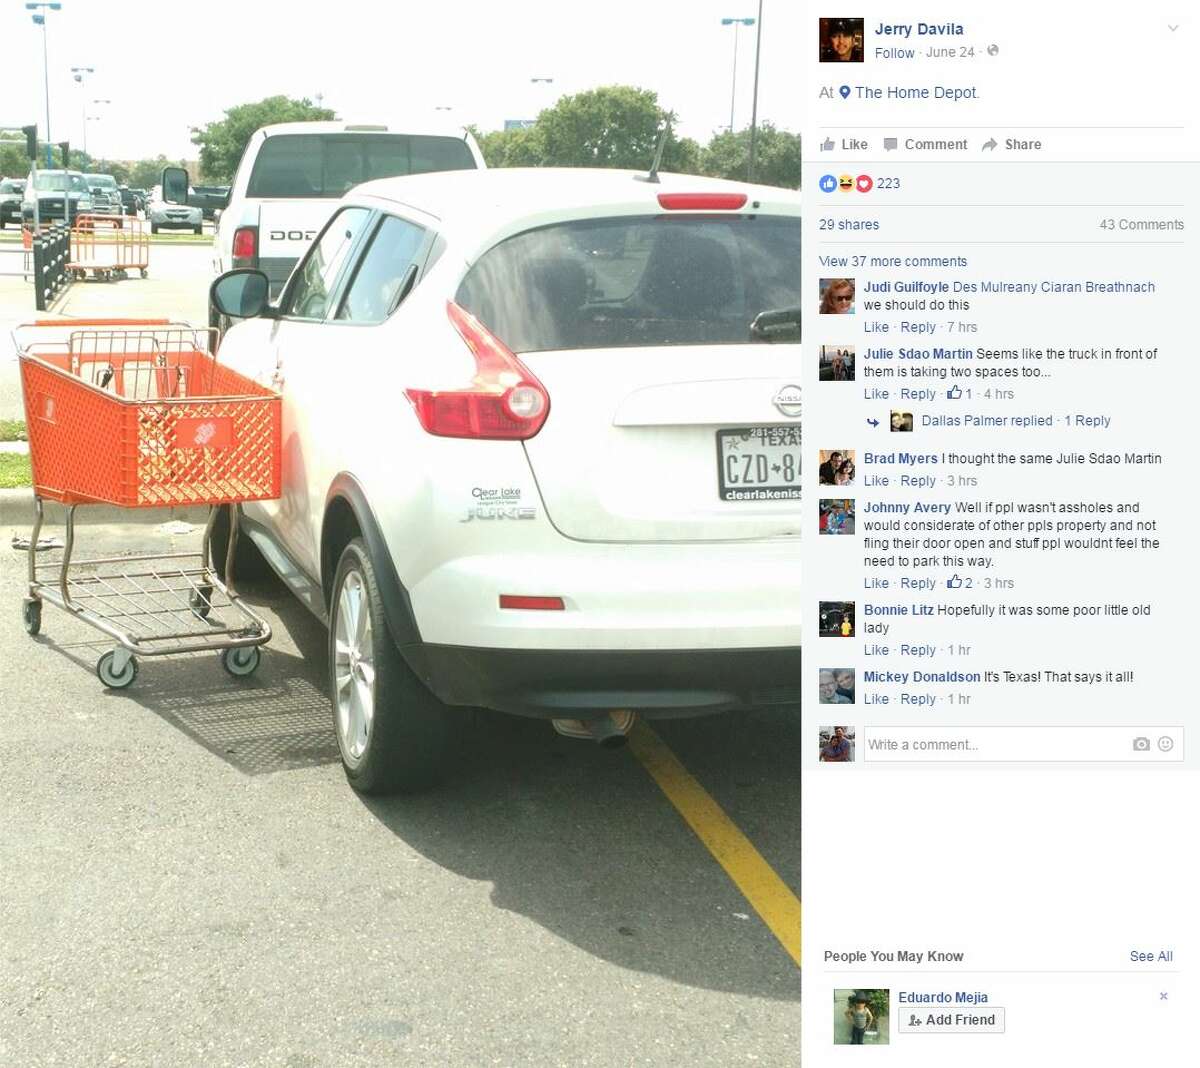 In the same handy fashion of the store, a man used a zip tie and a Home Depot shopping cart to teach the driver of a double-parked car a lesson.